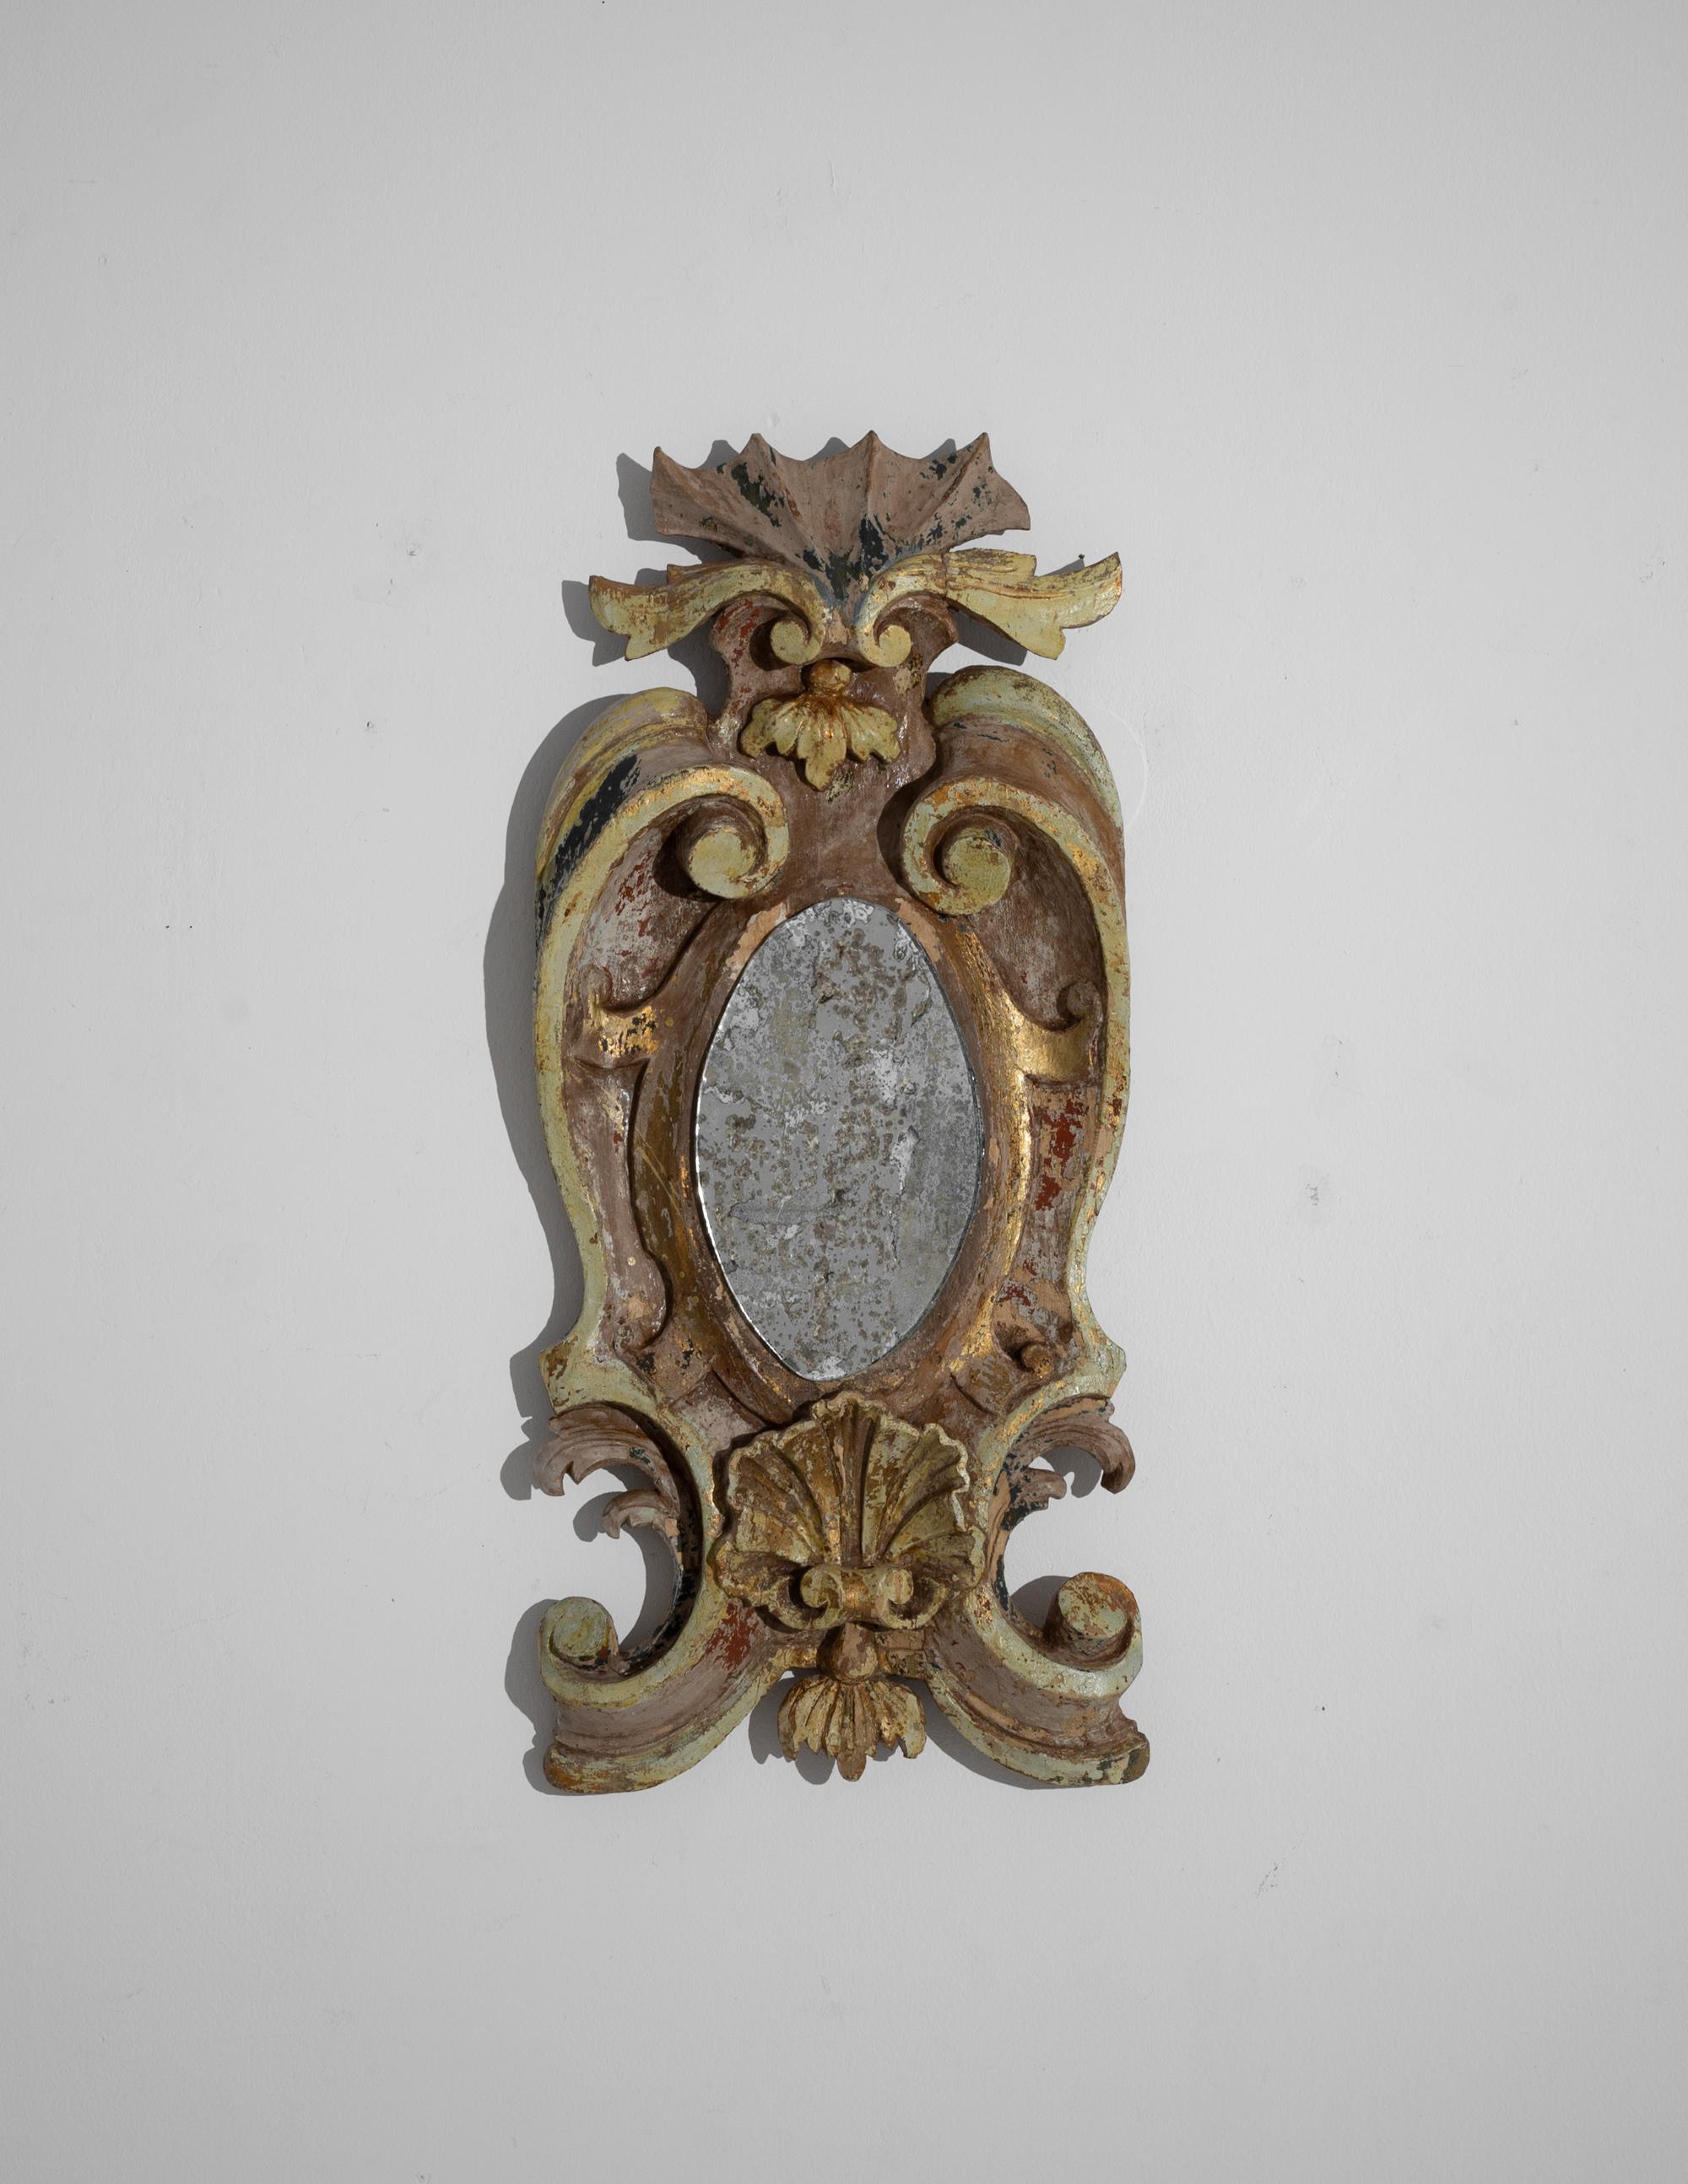 This antique wooden mirror was produced in France, circa 1820. A grandiose mirror with a baroque influence, garnished with scrolled foliage and luxuriant ornamentations. The ribbons and festoons are completed by a central shell-shaped carved piece